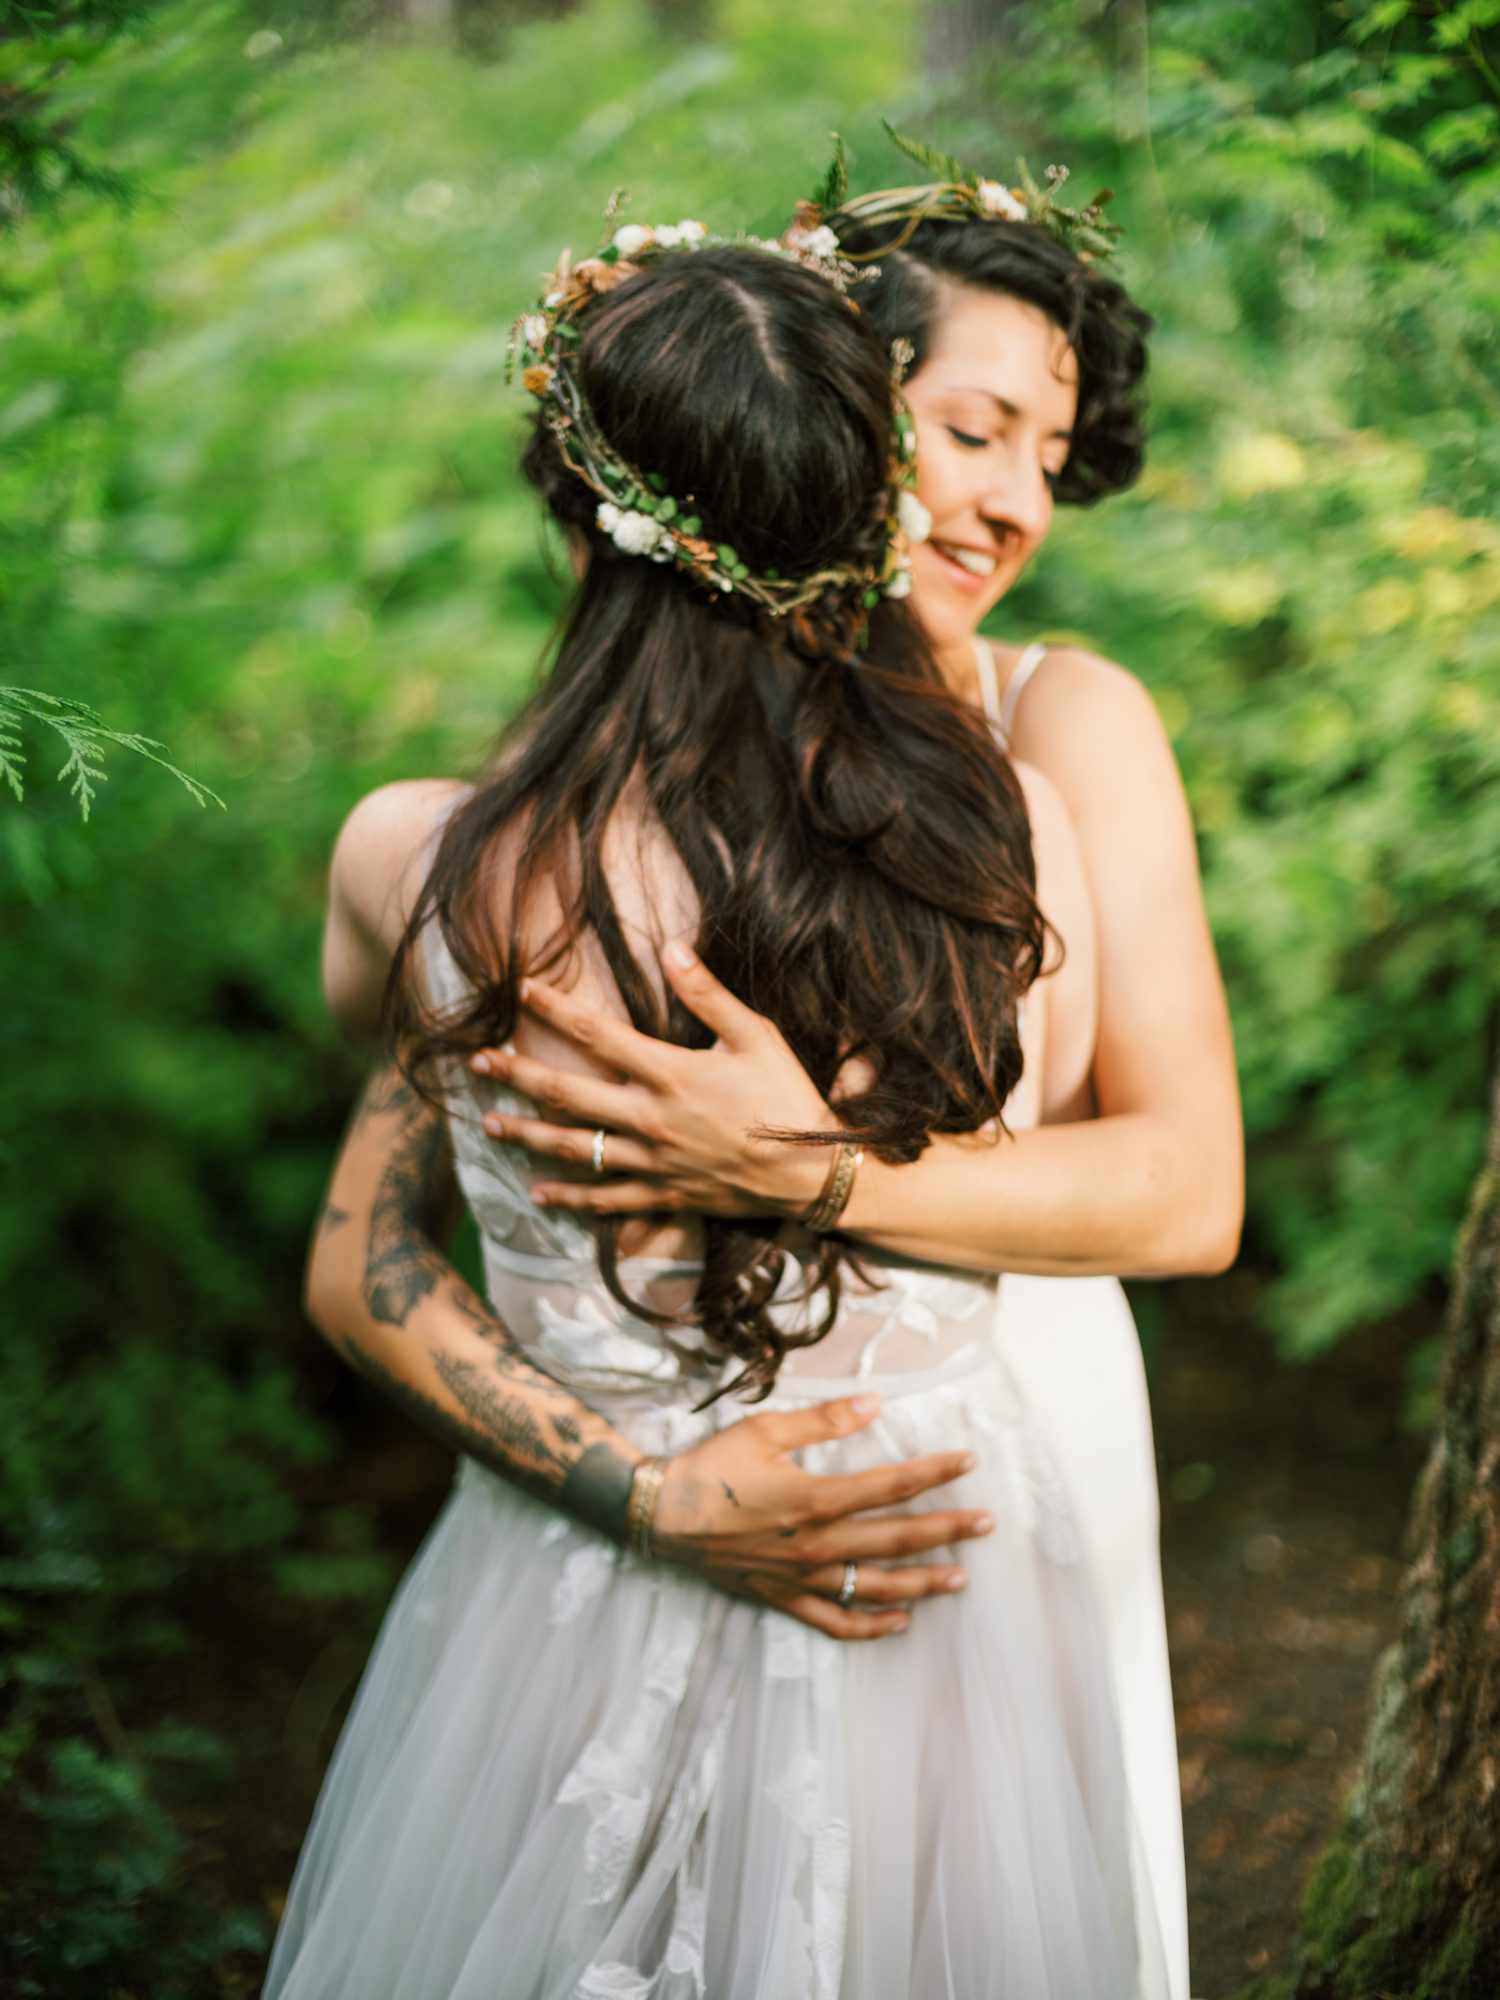 brides hugging during wedding portraits outside in forest